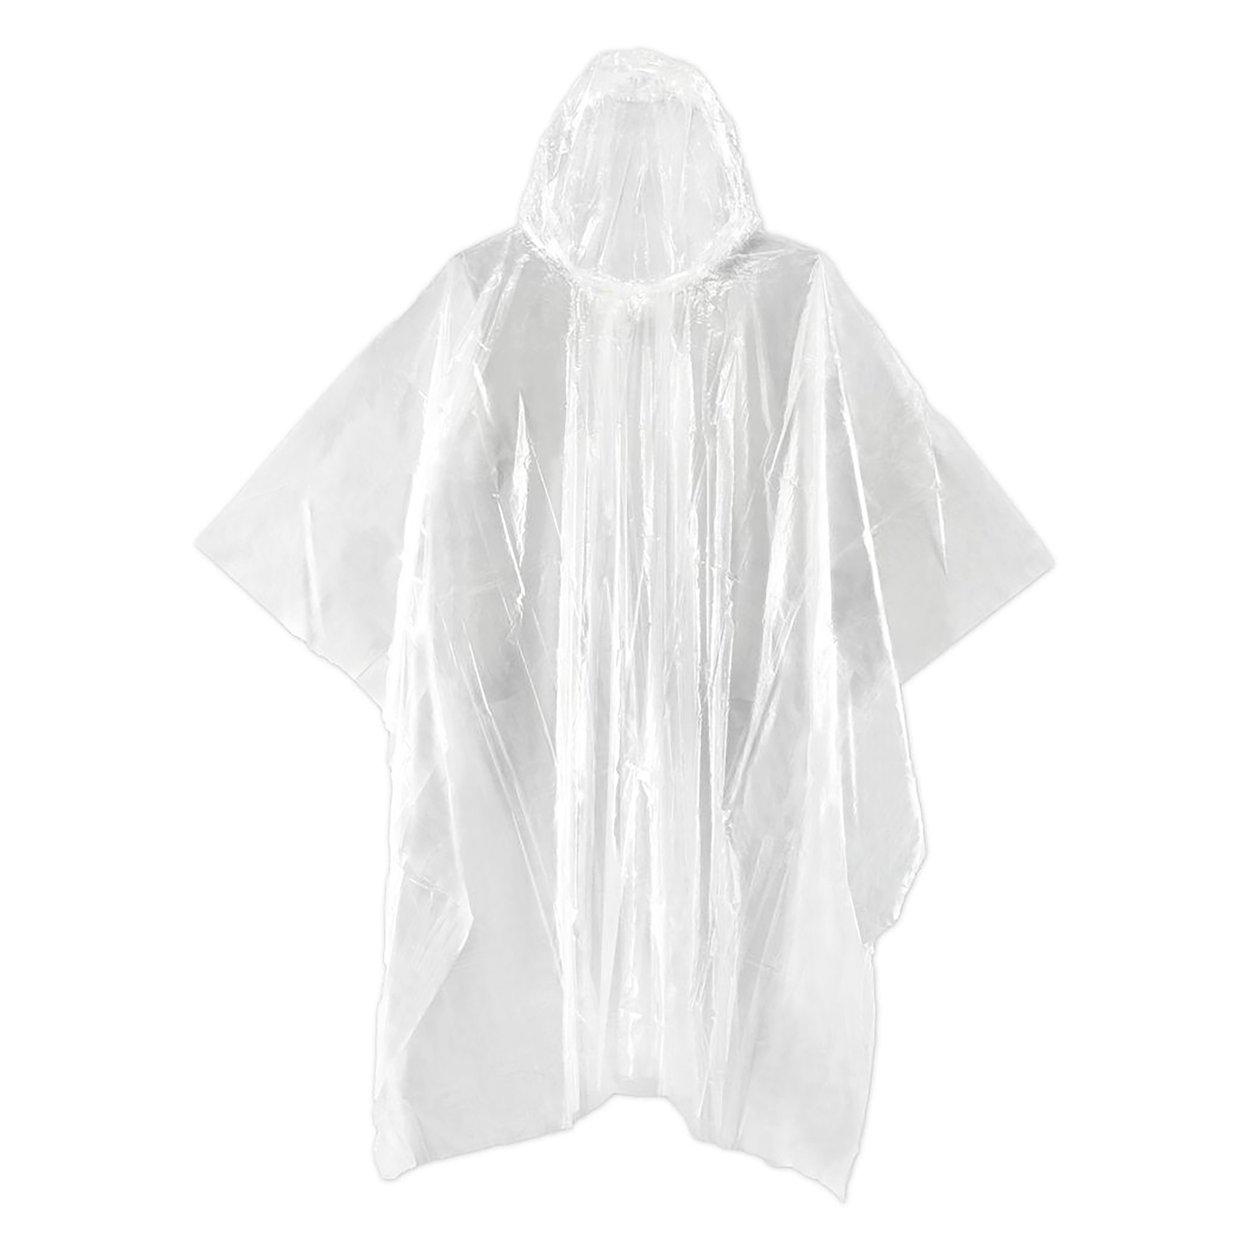 Front view of the Rain Poncho-Cyclist unfolded.